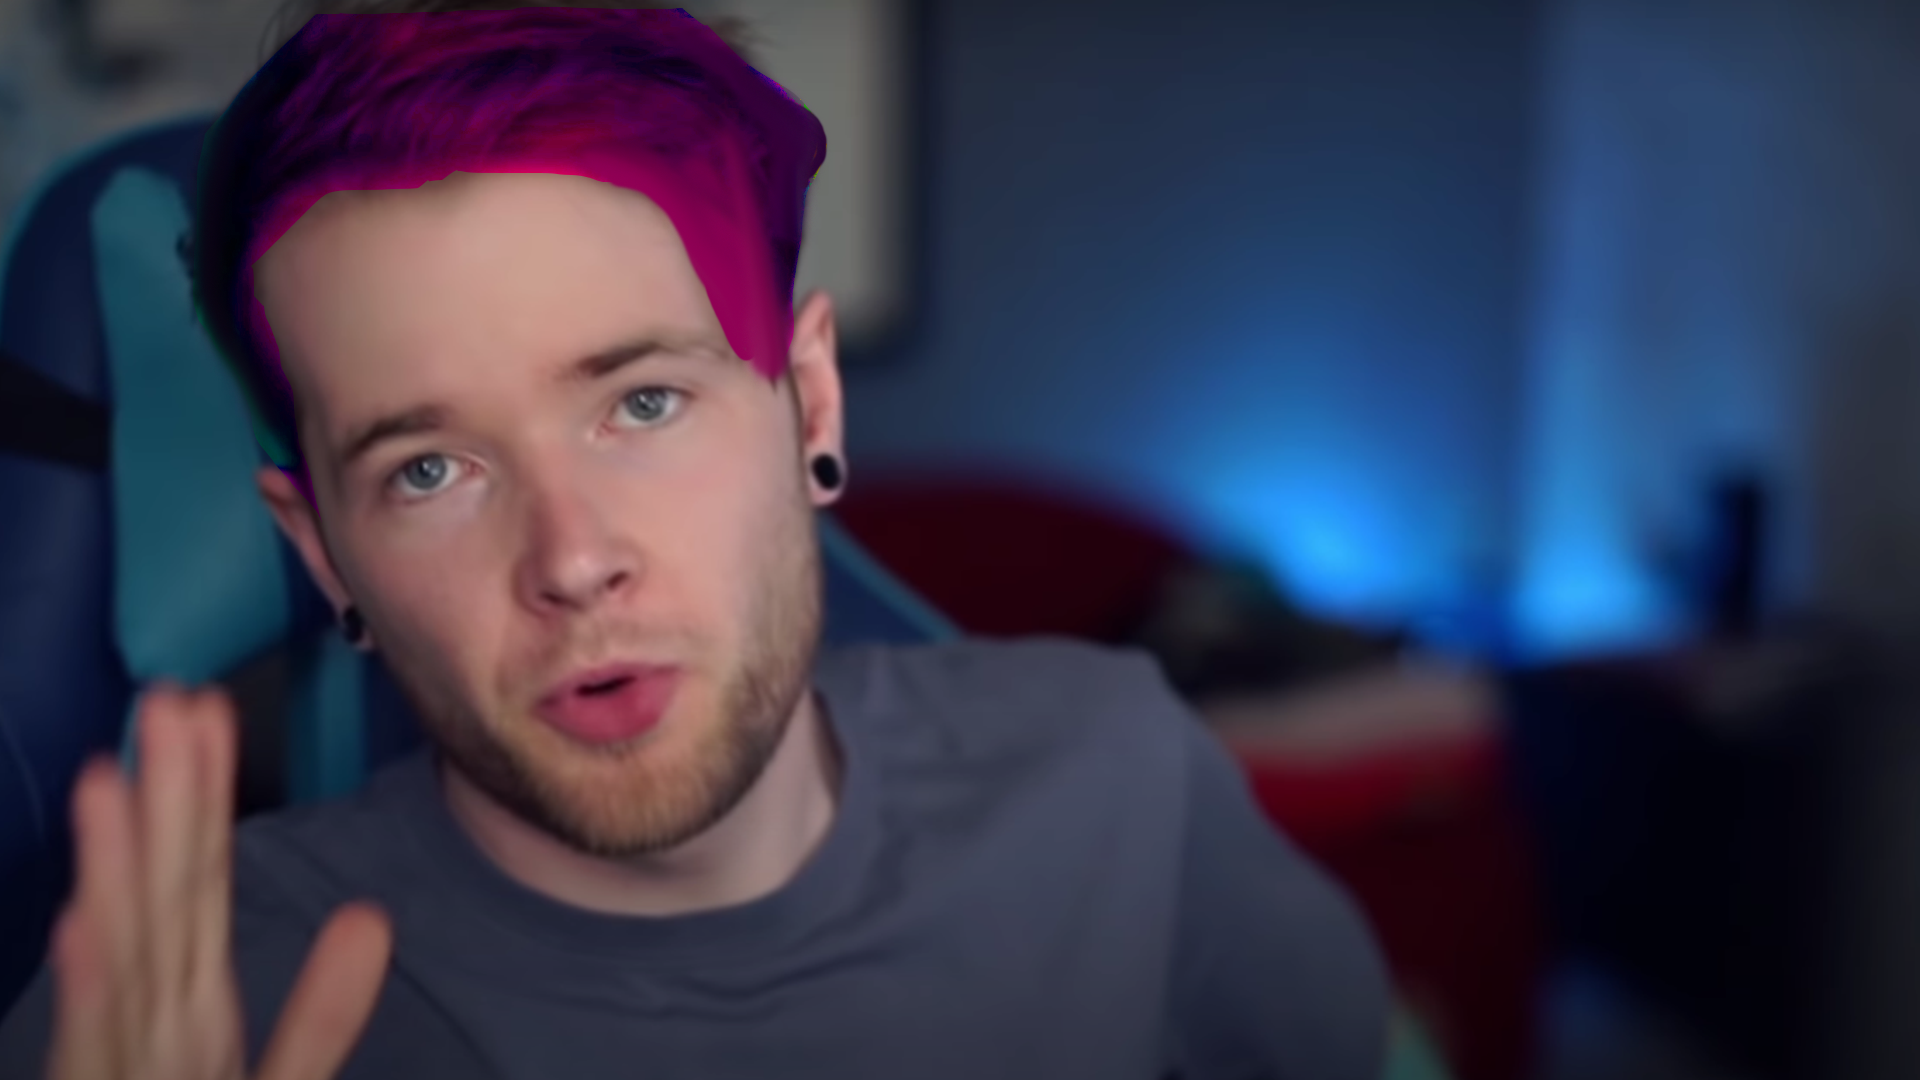 2. How to Achieve Dantdm's Iconic Blue Hair Look - wide 2